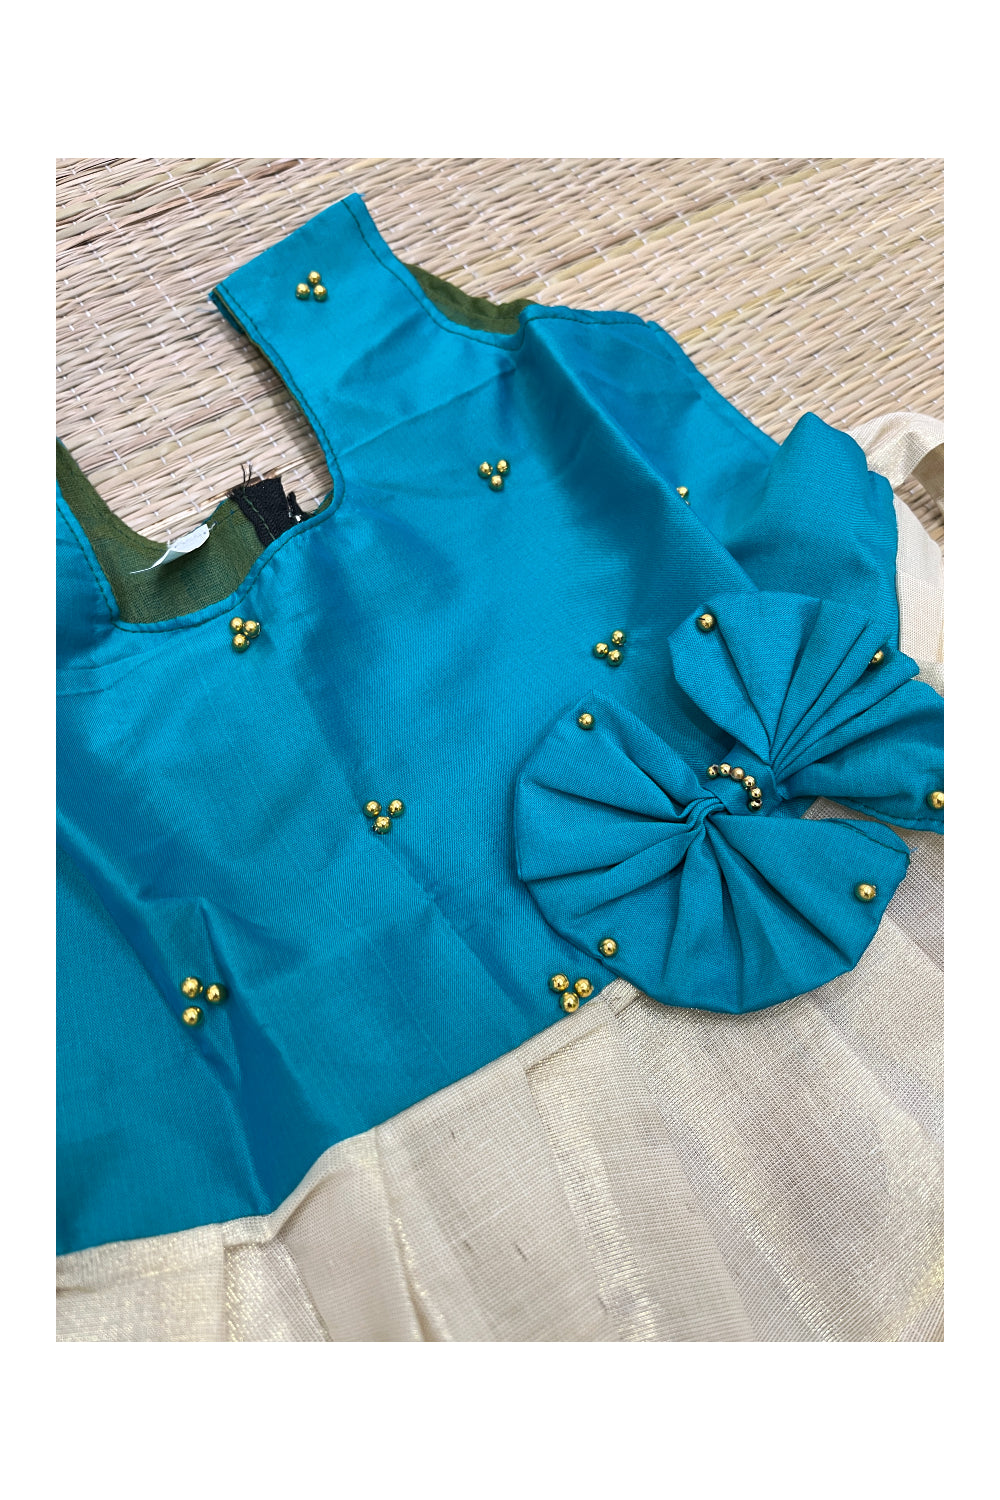 Southloom Kerala Tissue Frock with Green Bead Work Designs for Kids (3 Years)